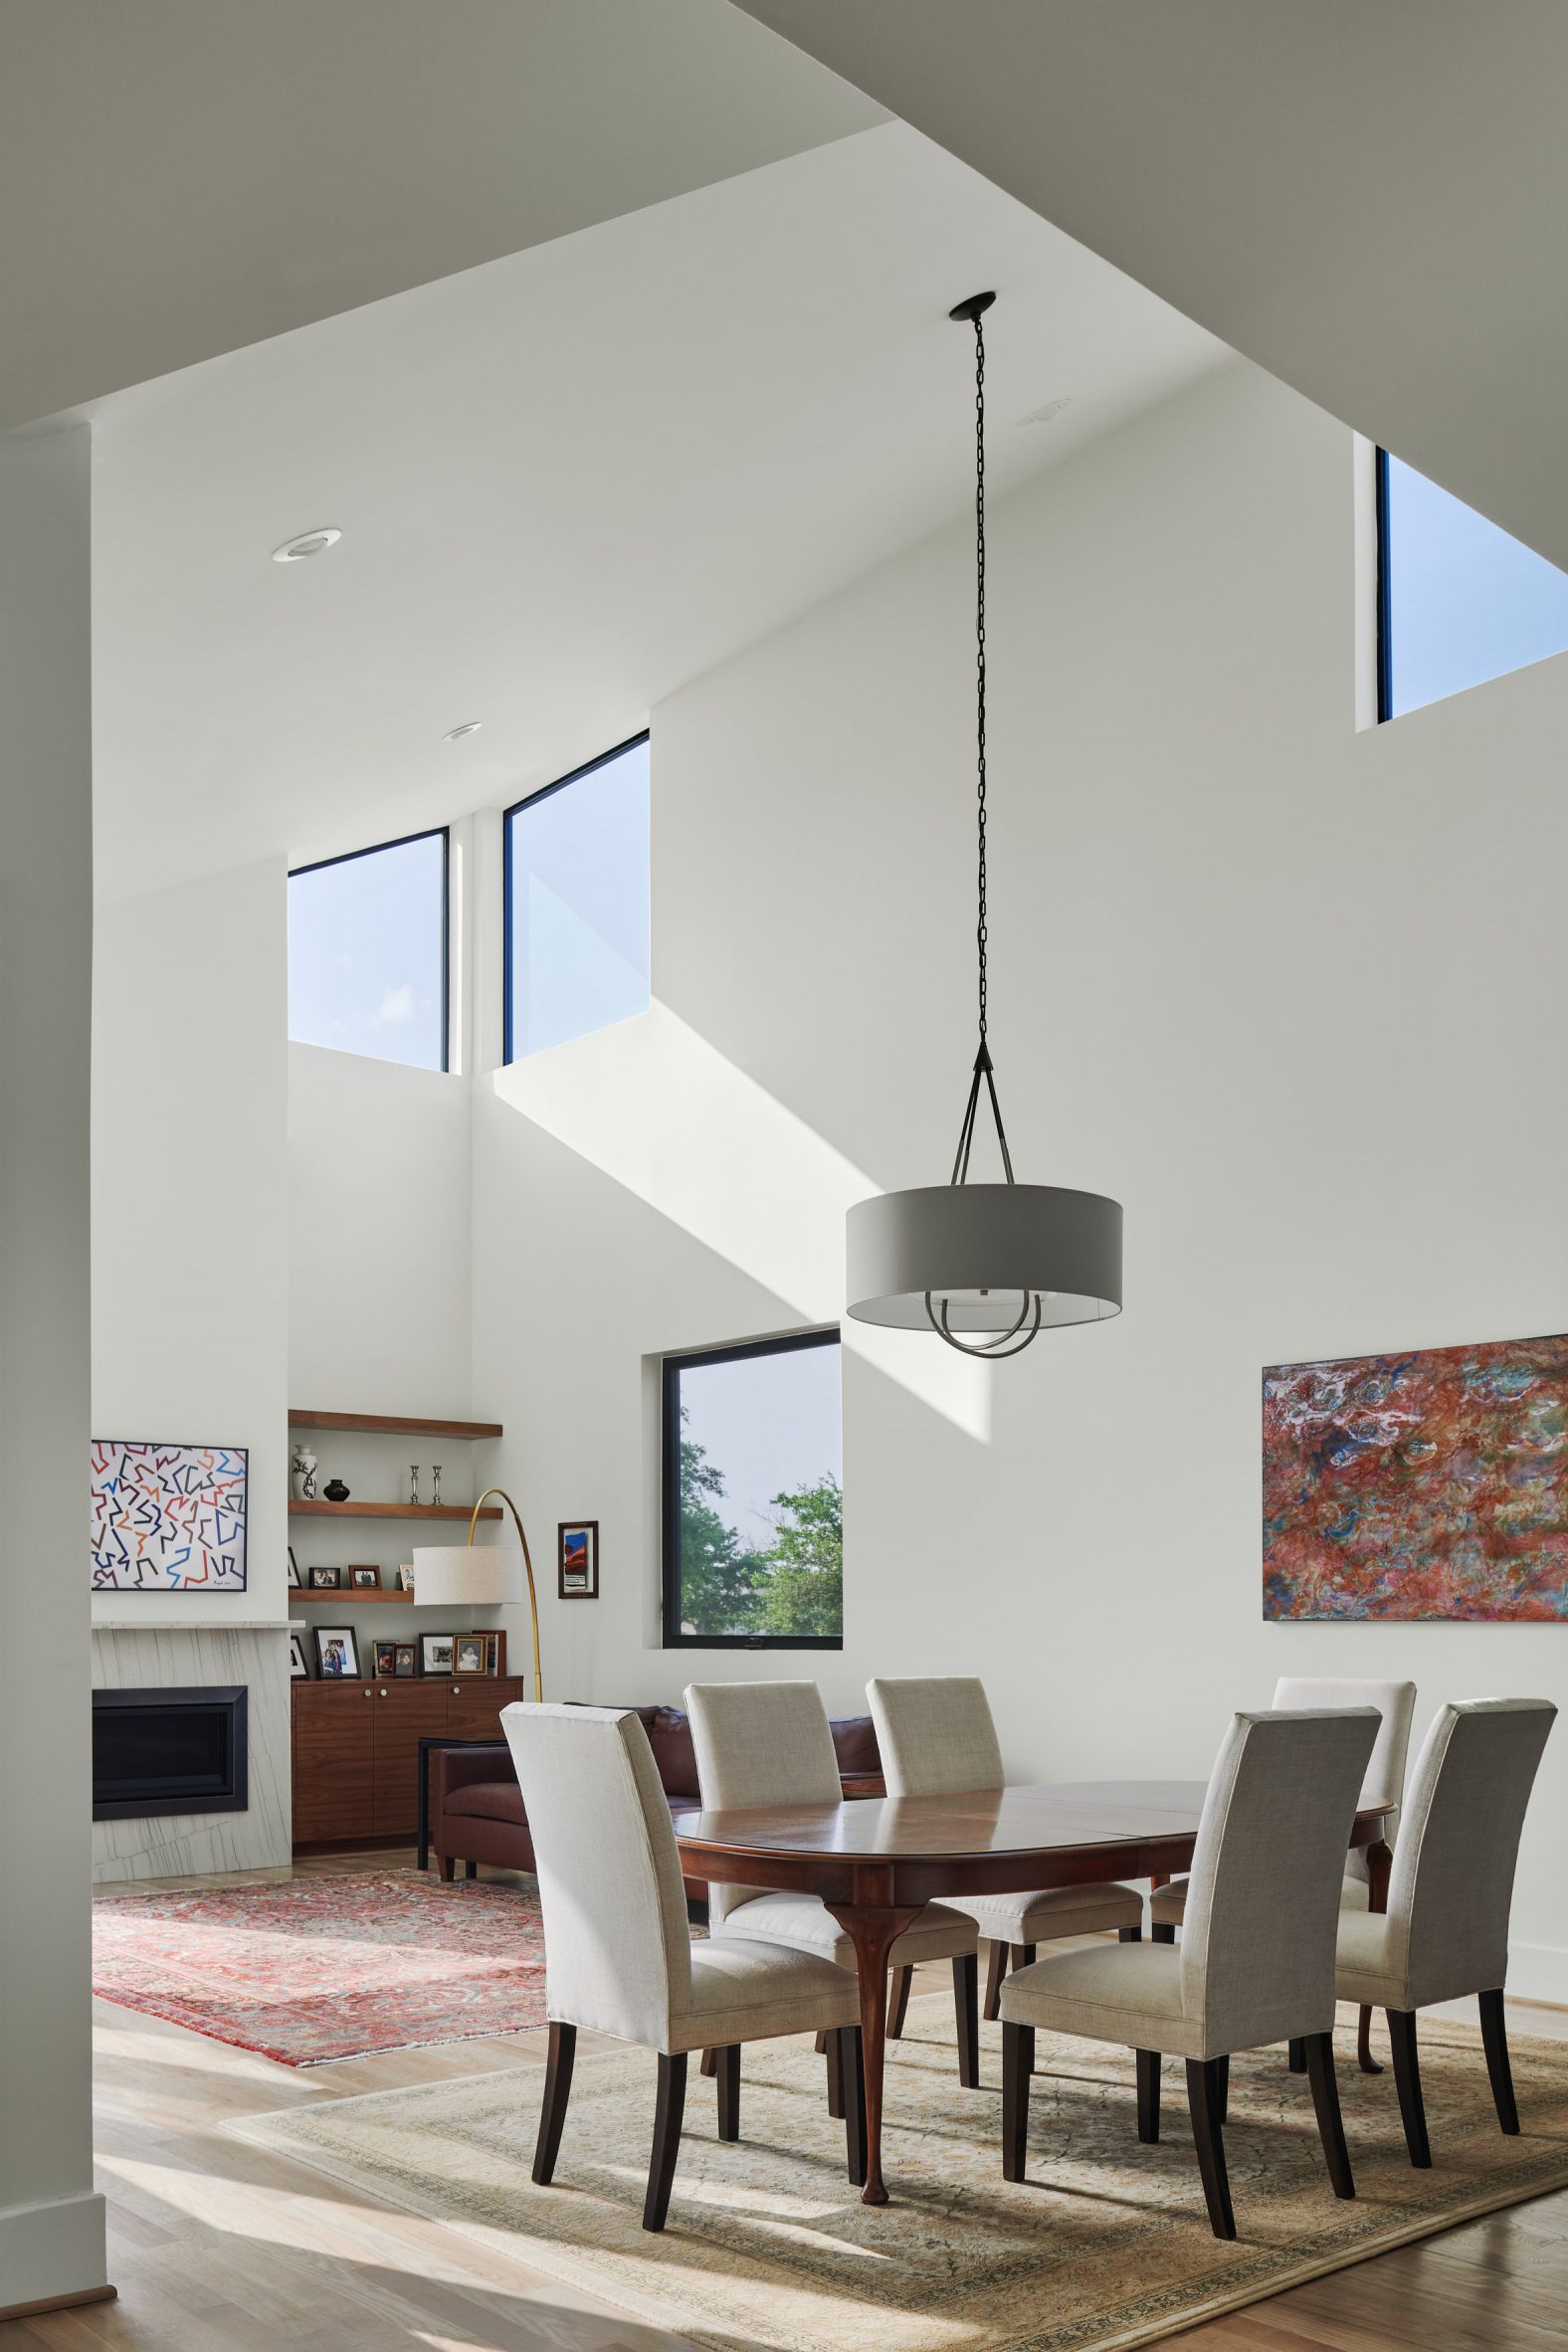 White double-height dining room with high-level windows and pendant light over a table